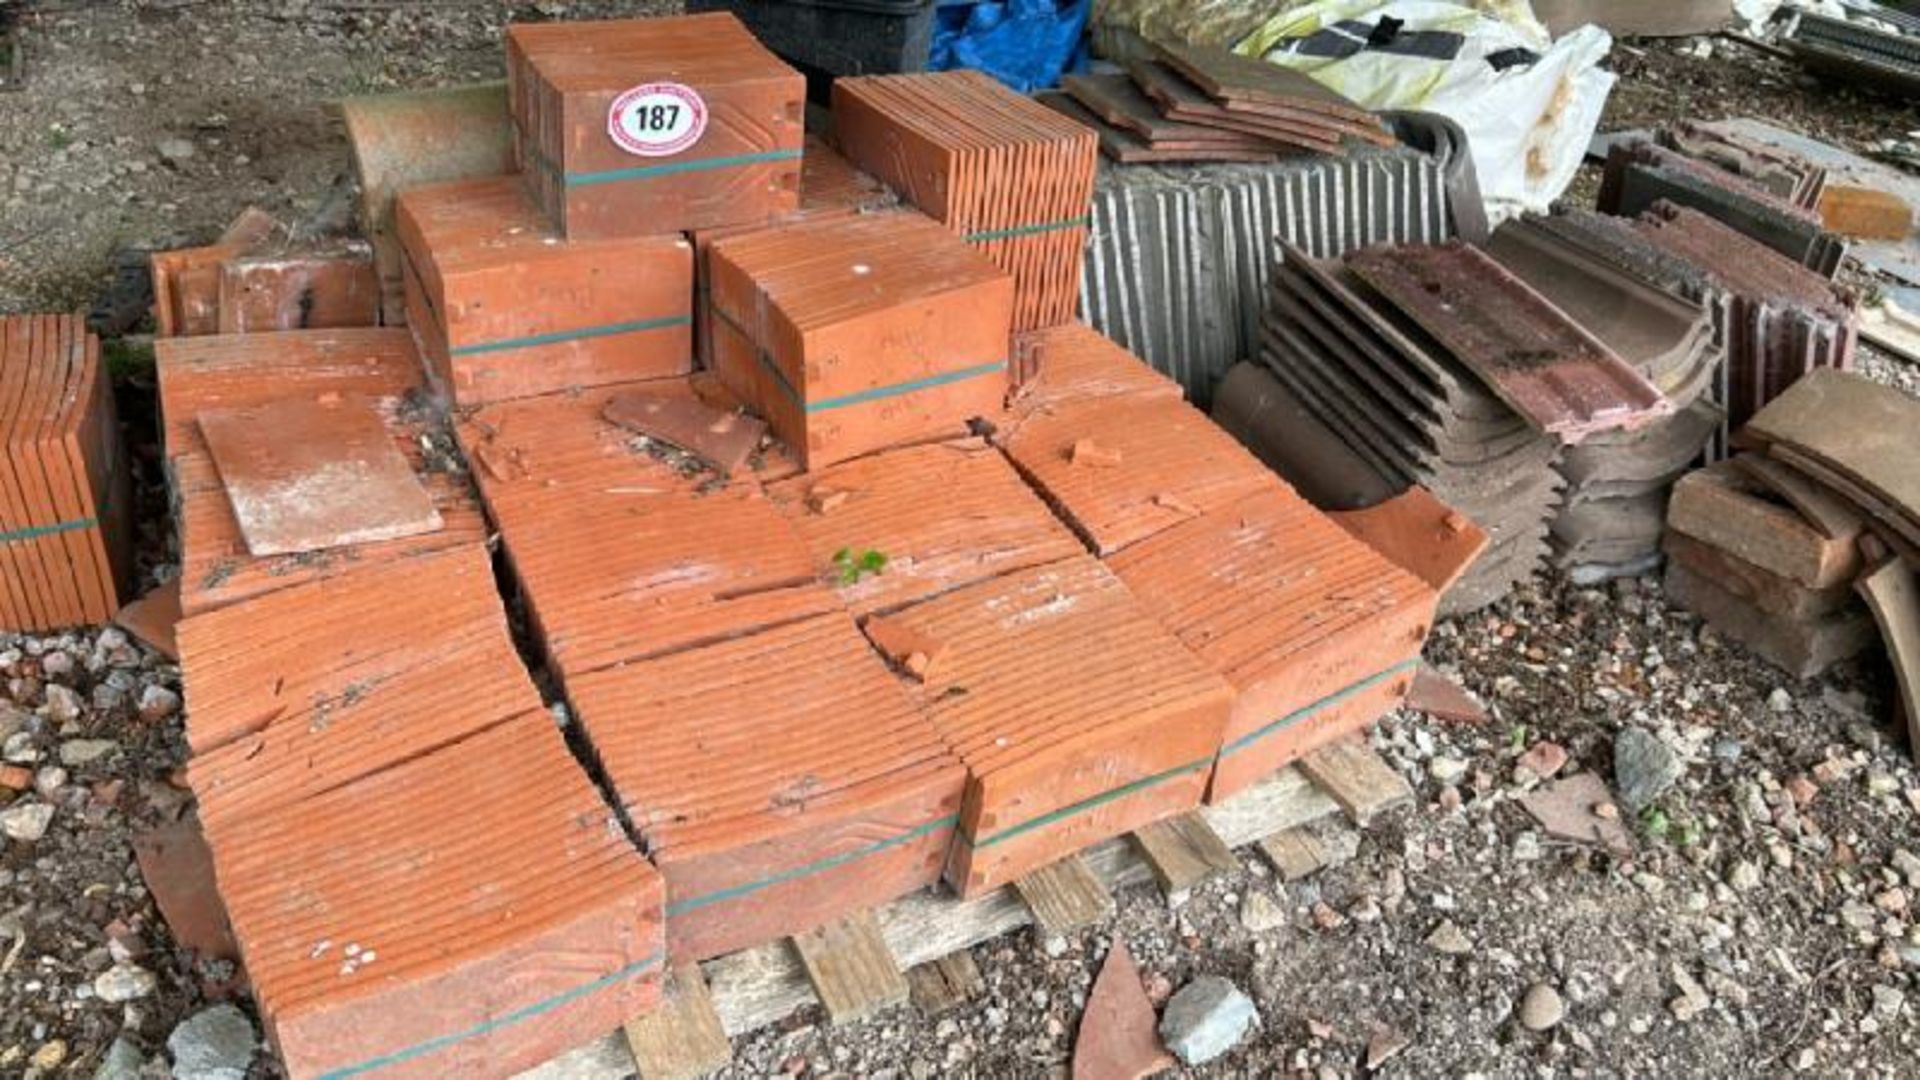 APPROX X340 CLAY PEG TILES, PHALEMPINING MADE IN FRANCE, WITH A GOOD QUANTITY OF OTHER VARIOUS